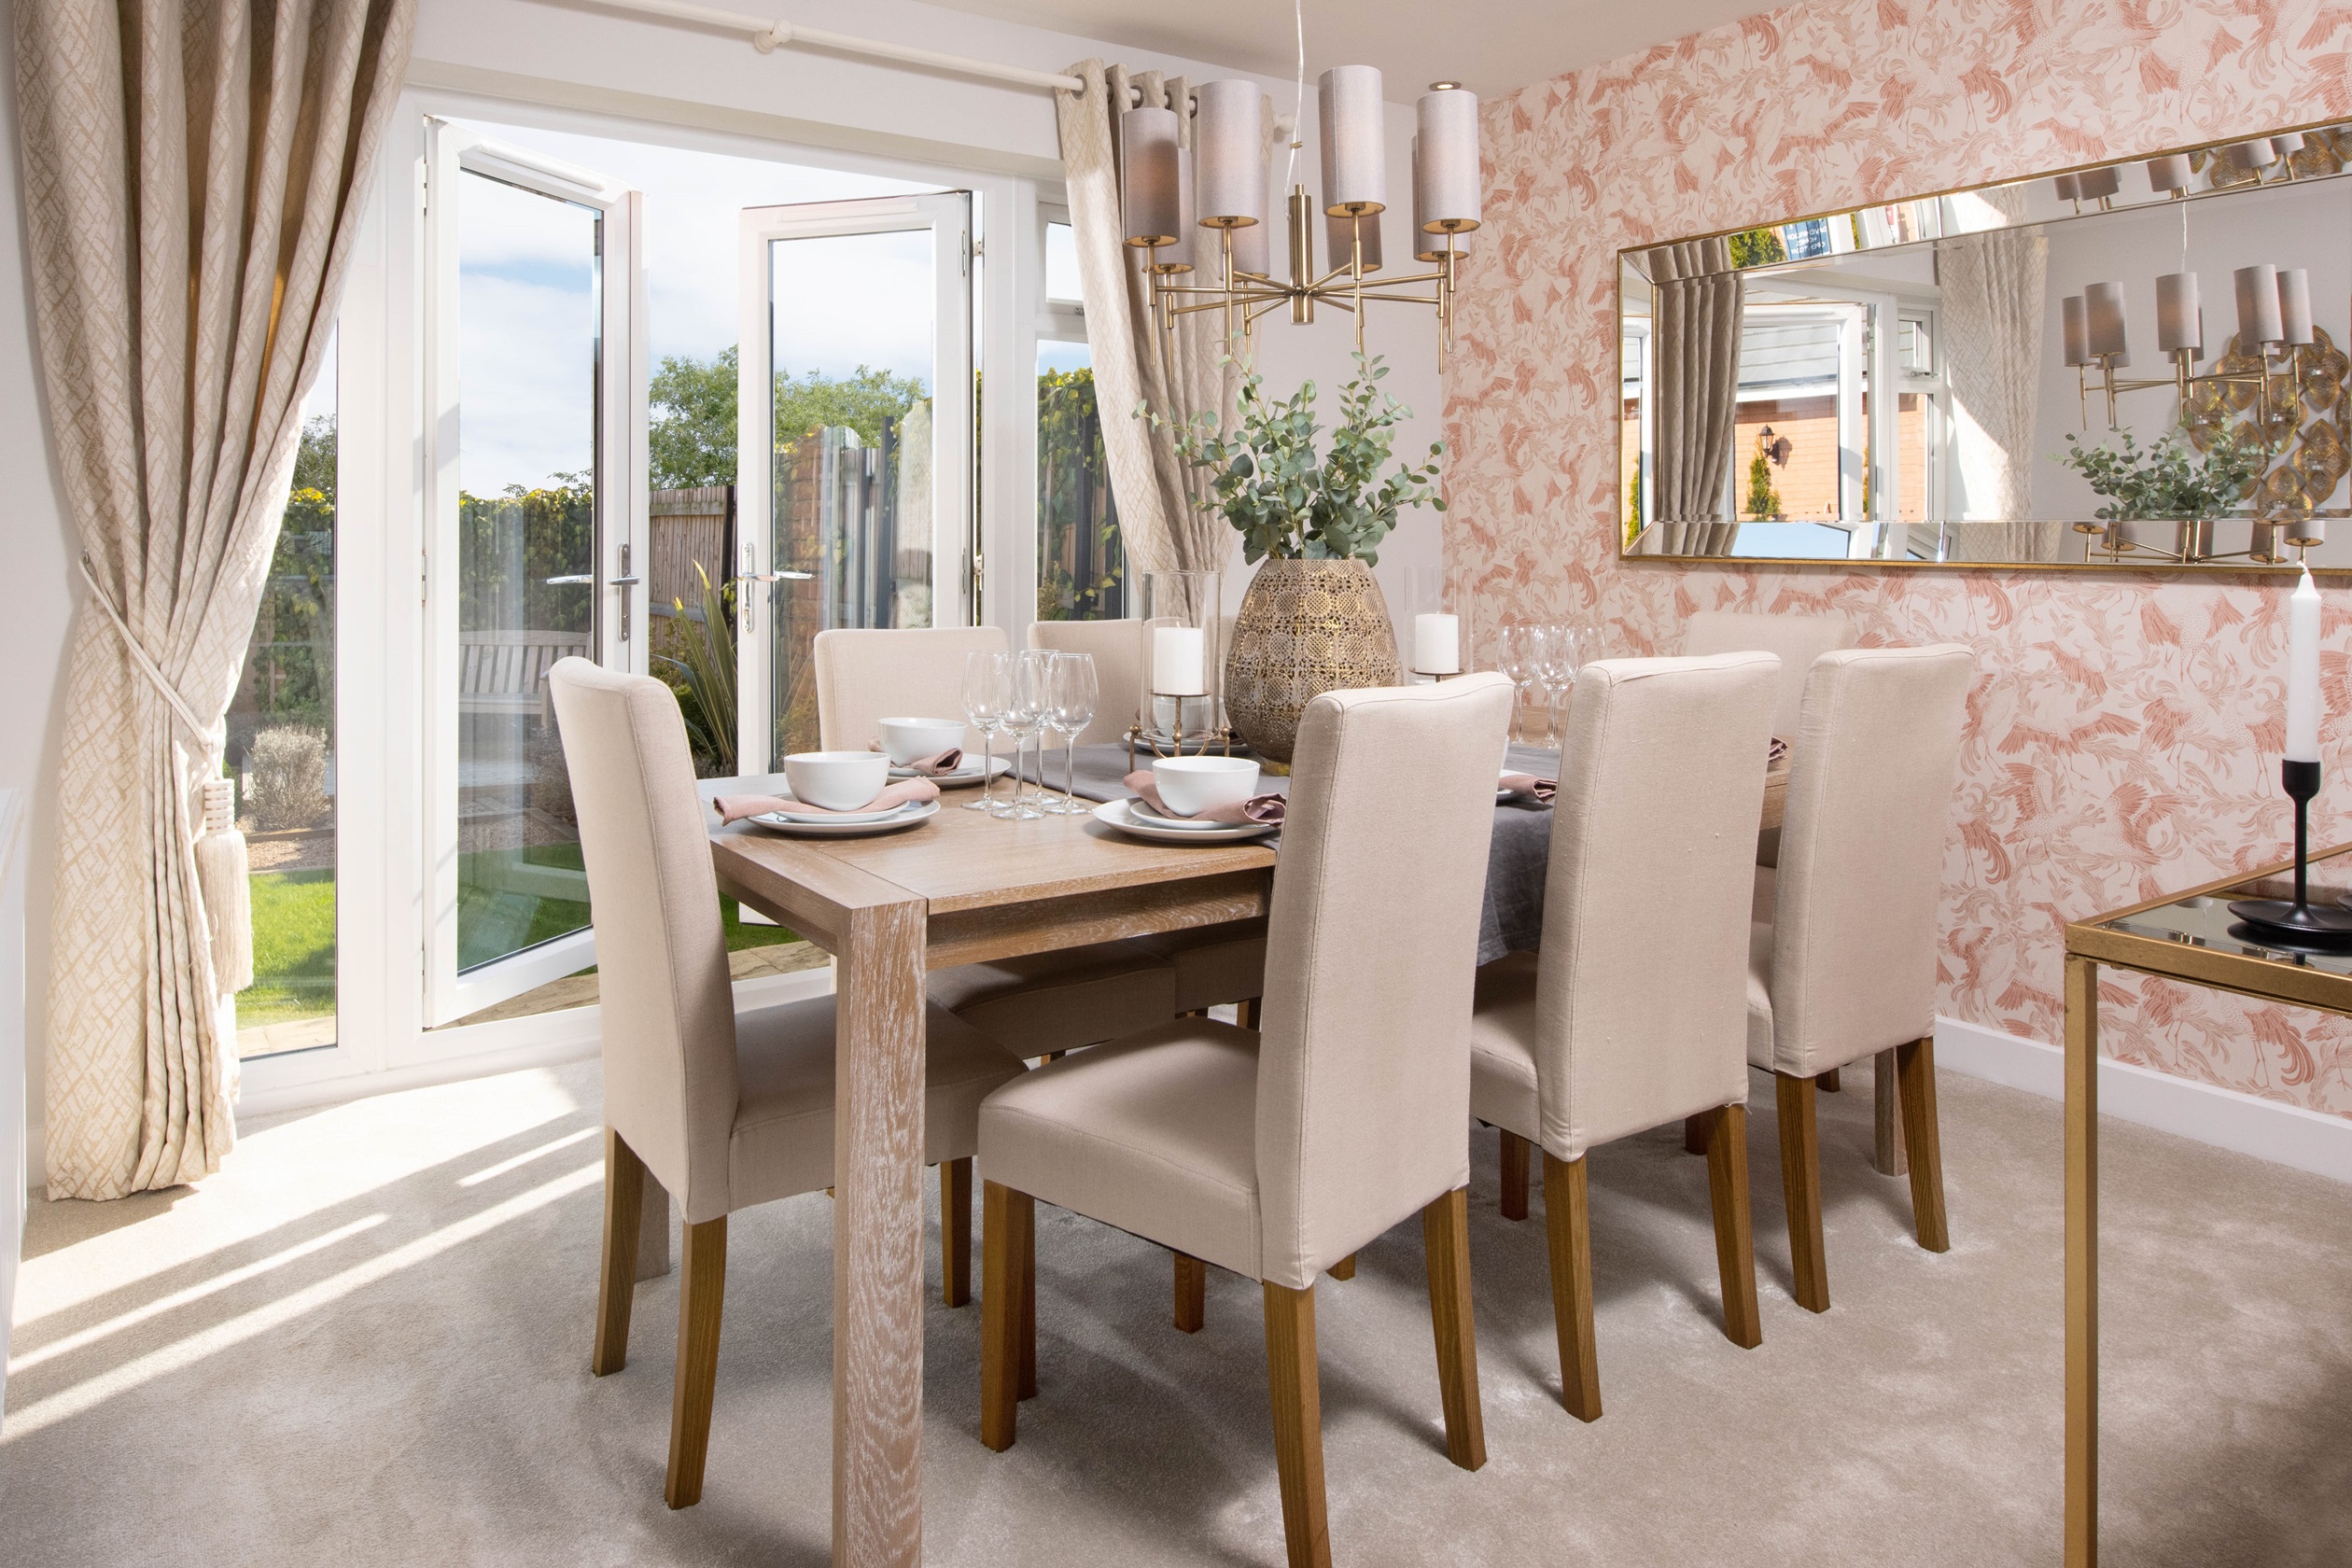 Property 3 of 9. View Of The Dining Room In The Lichfield 5 Bedroom Home